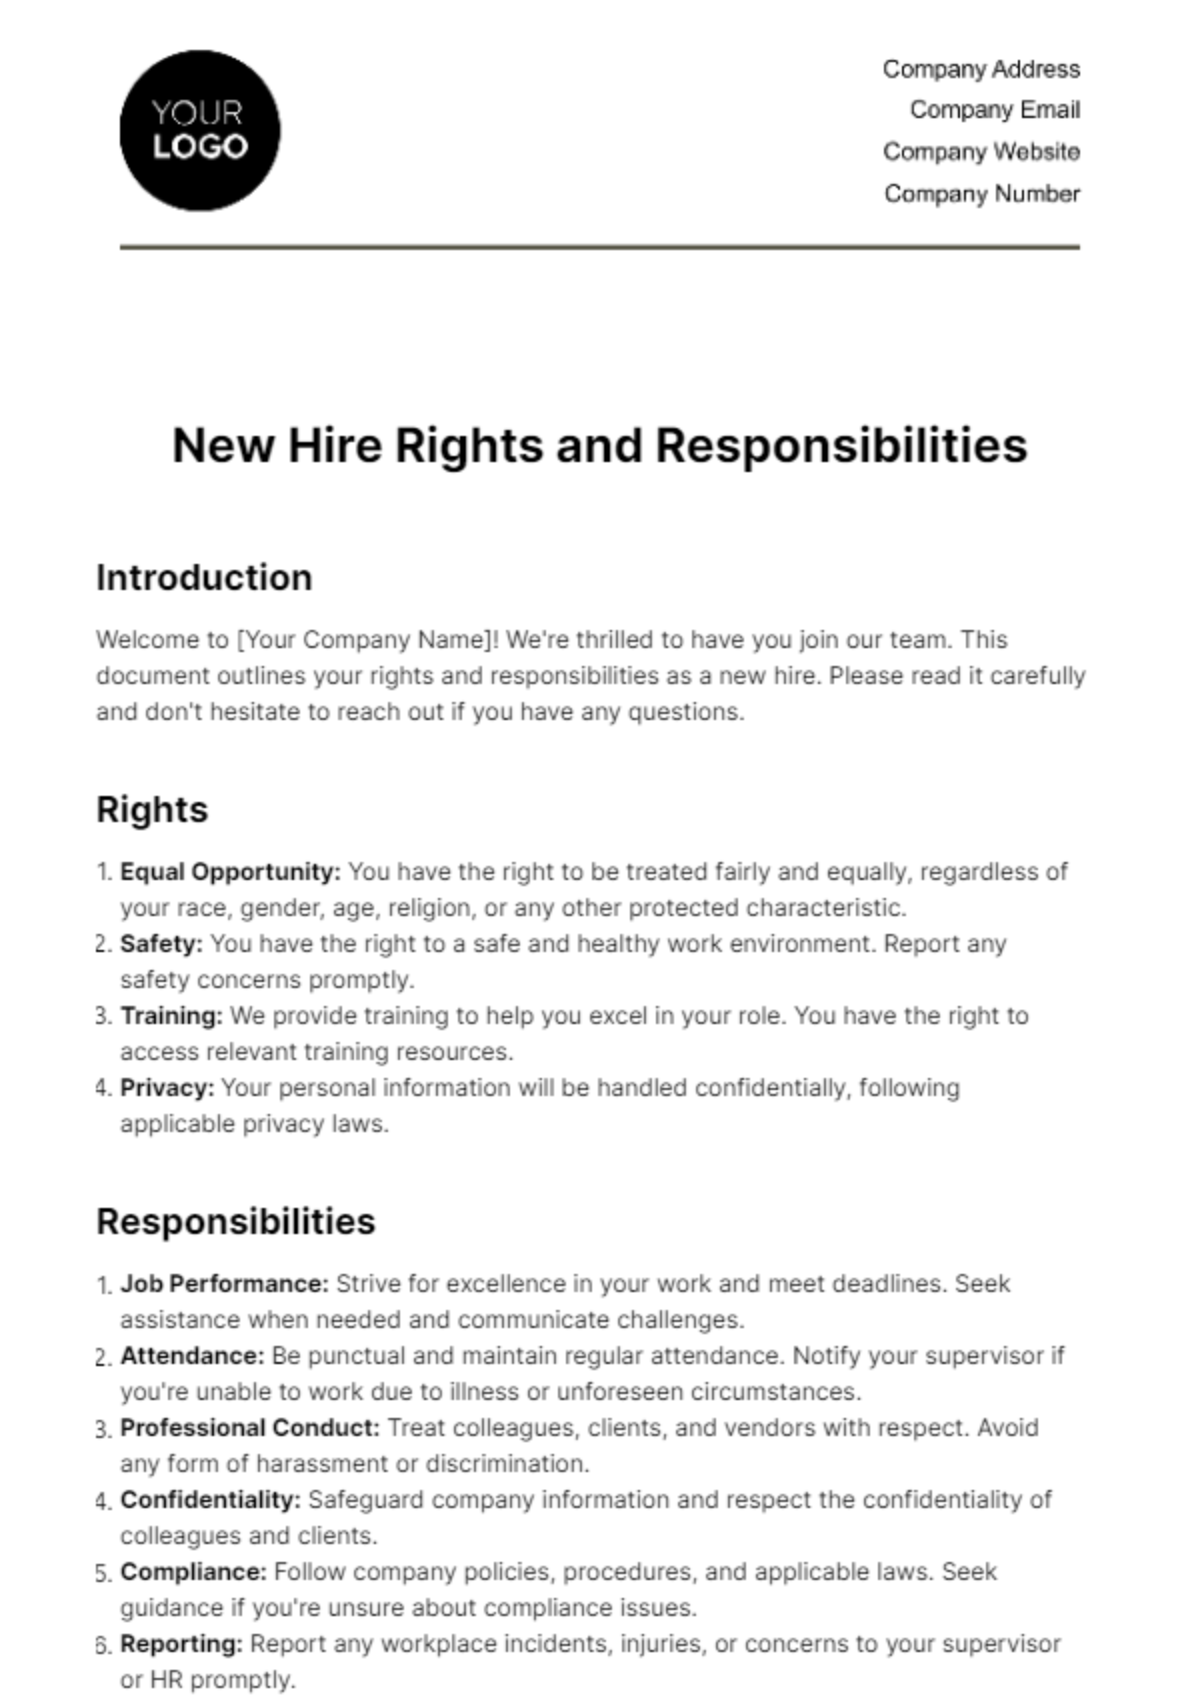 New Hire Rights and Responsibilities HR Template